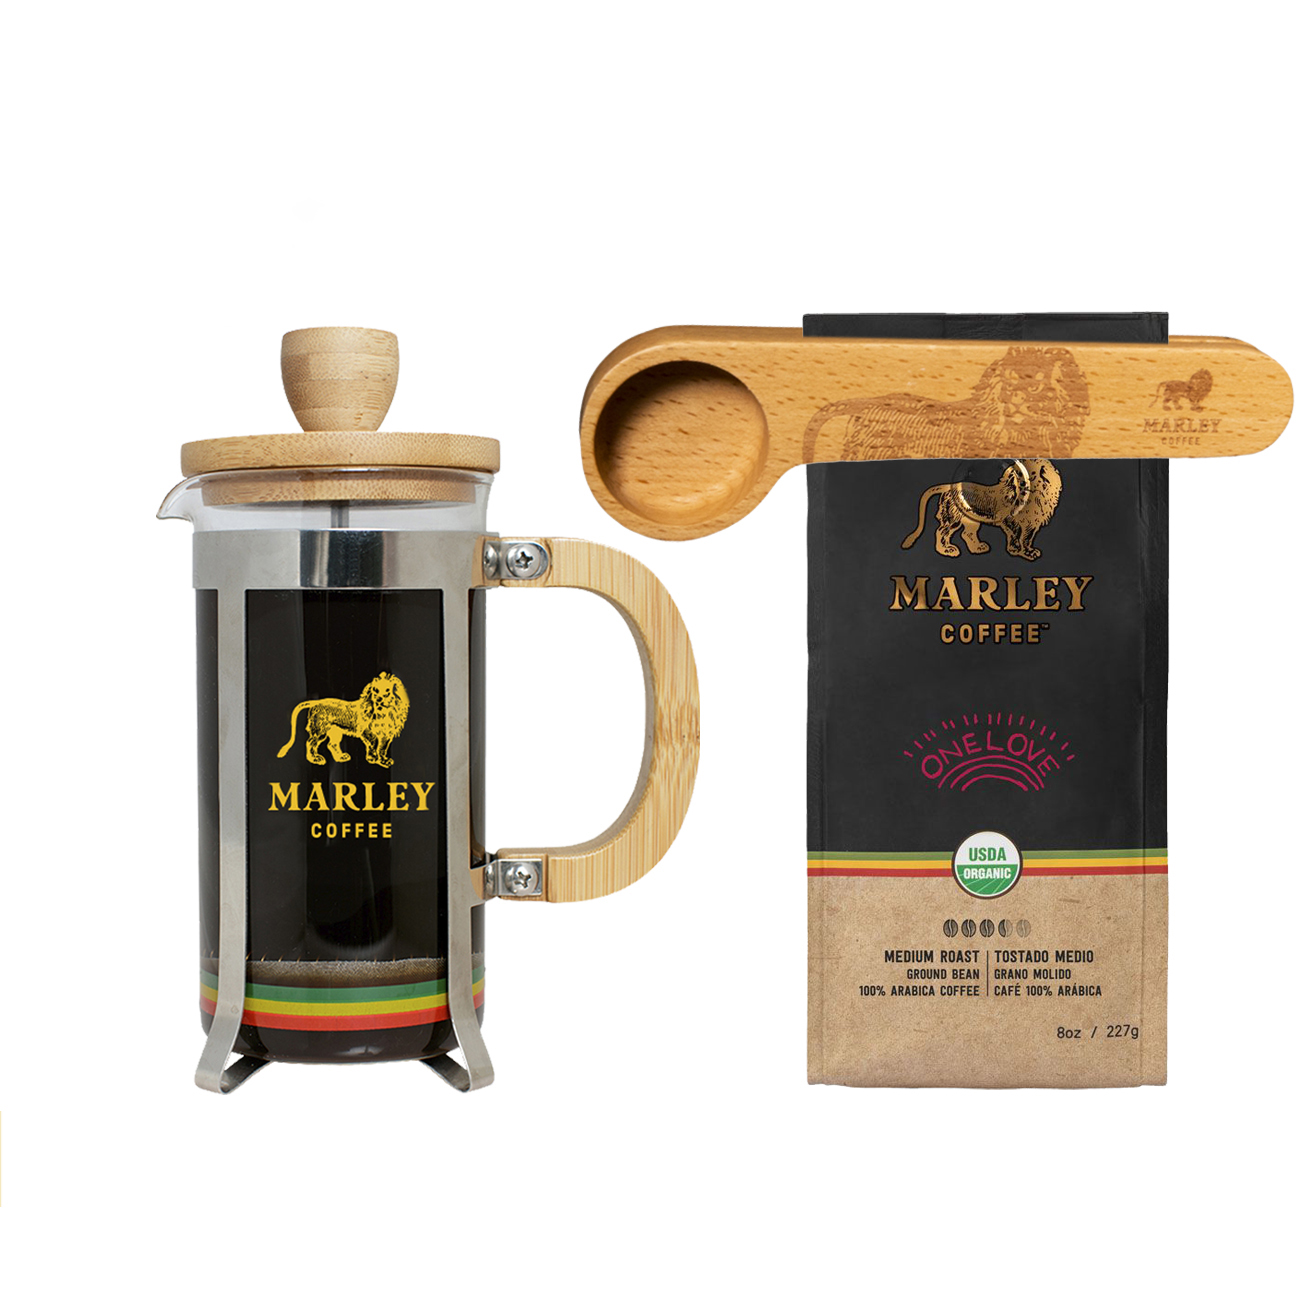 Marley Coffee Packs a Domicilio - One Drop Chile